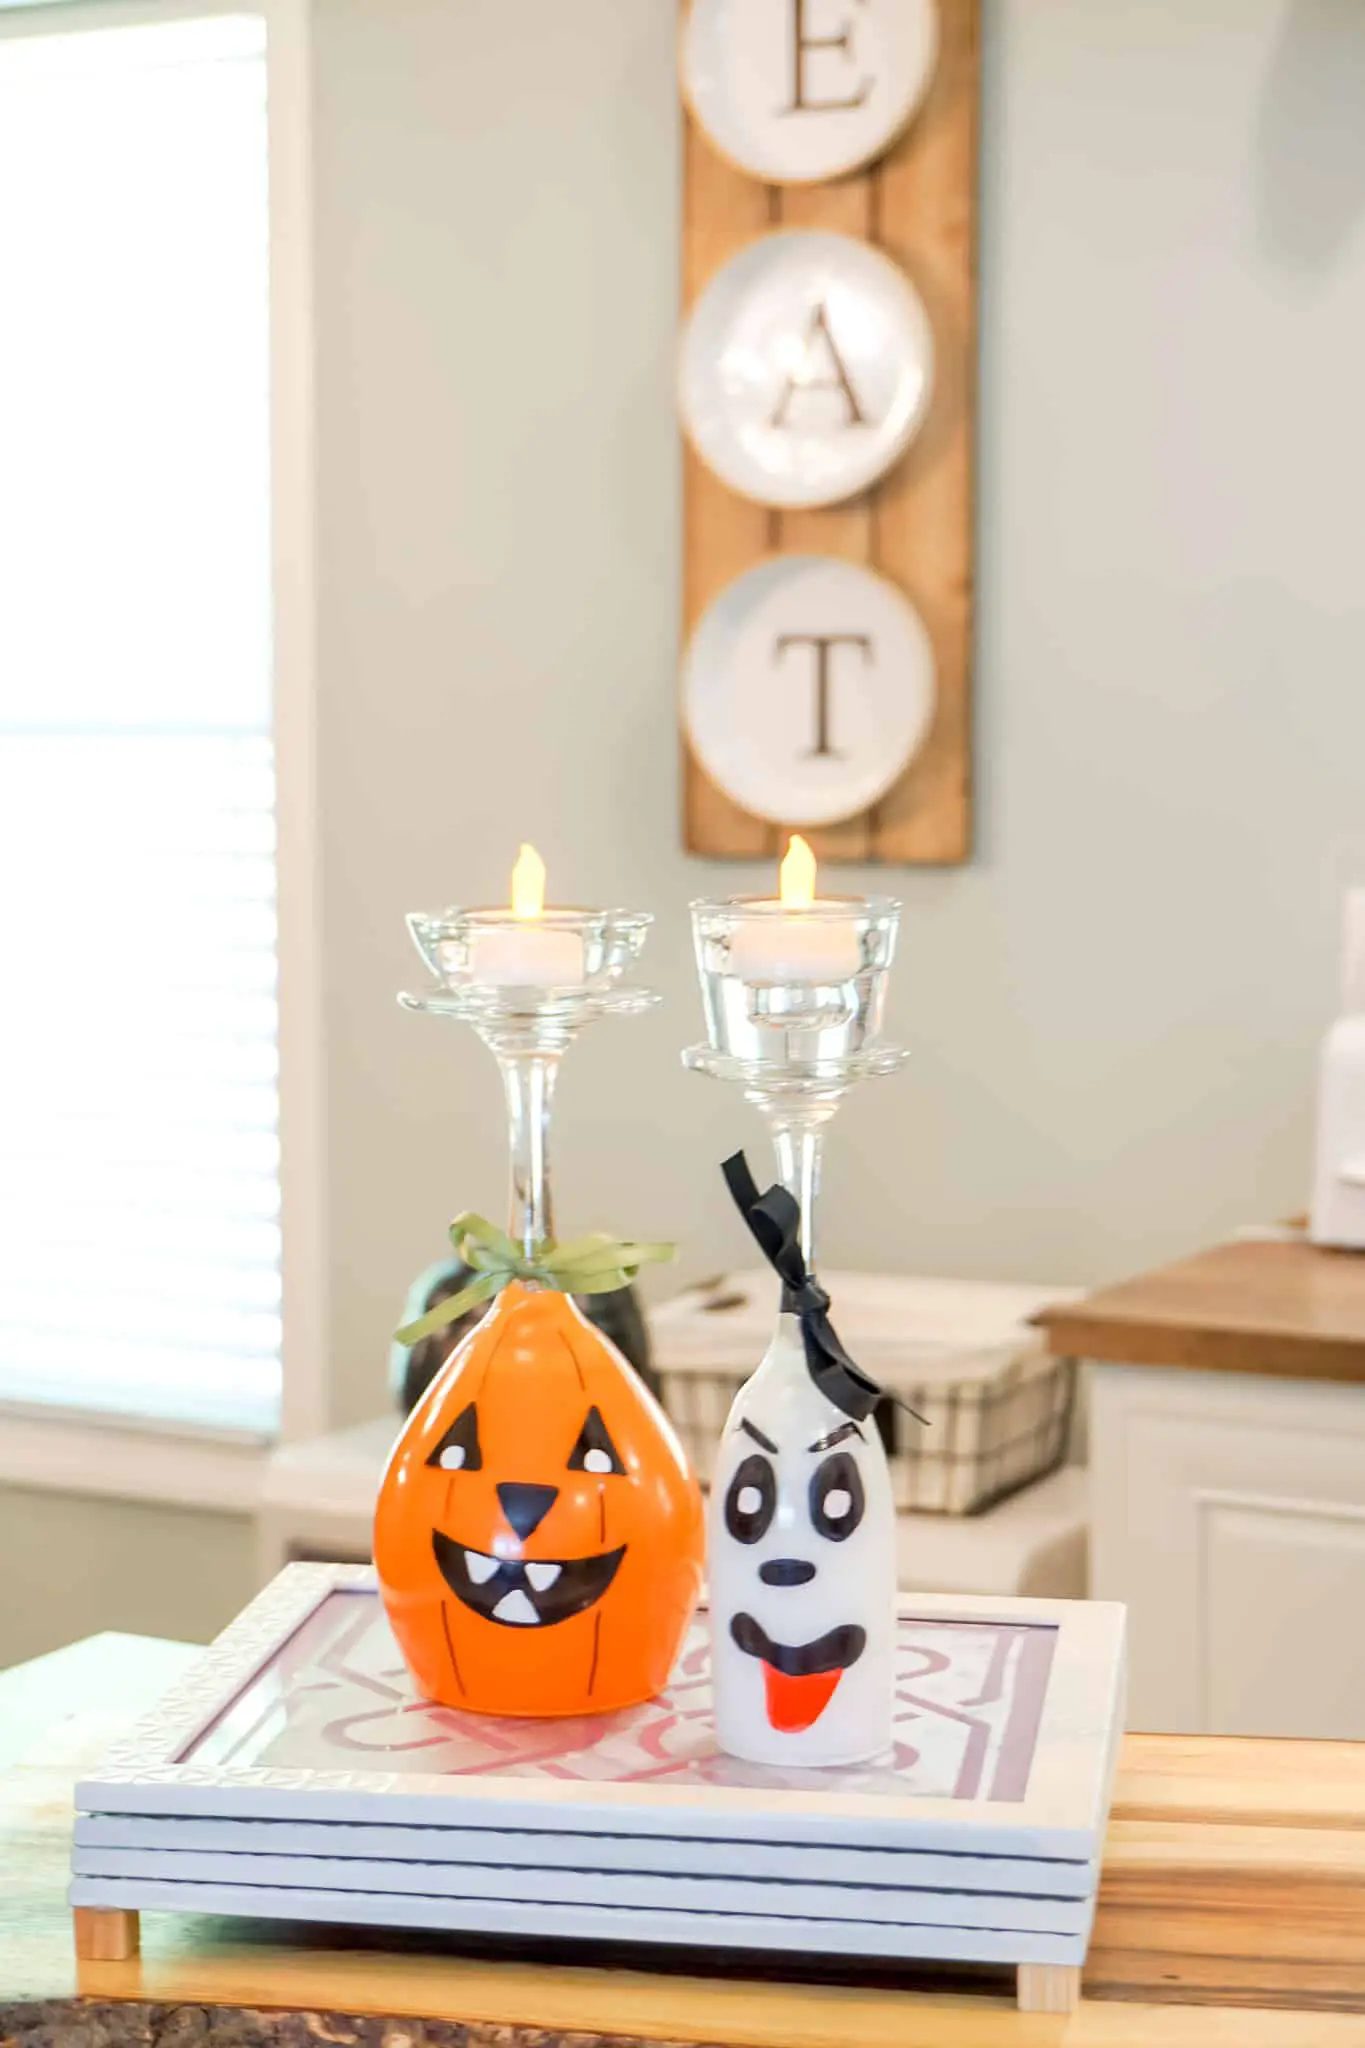 Make Your Own Home Decor Riser Using Cricut And Dollar Tree Items